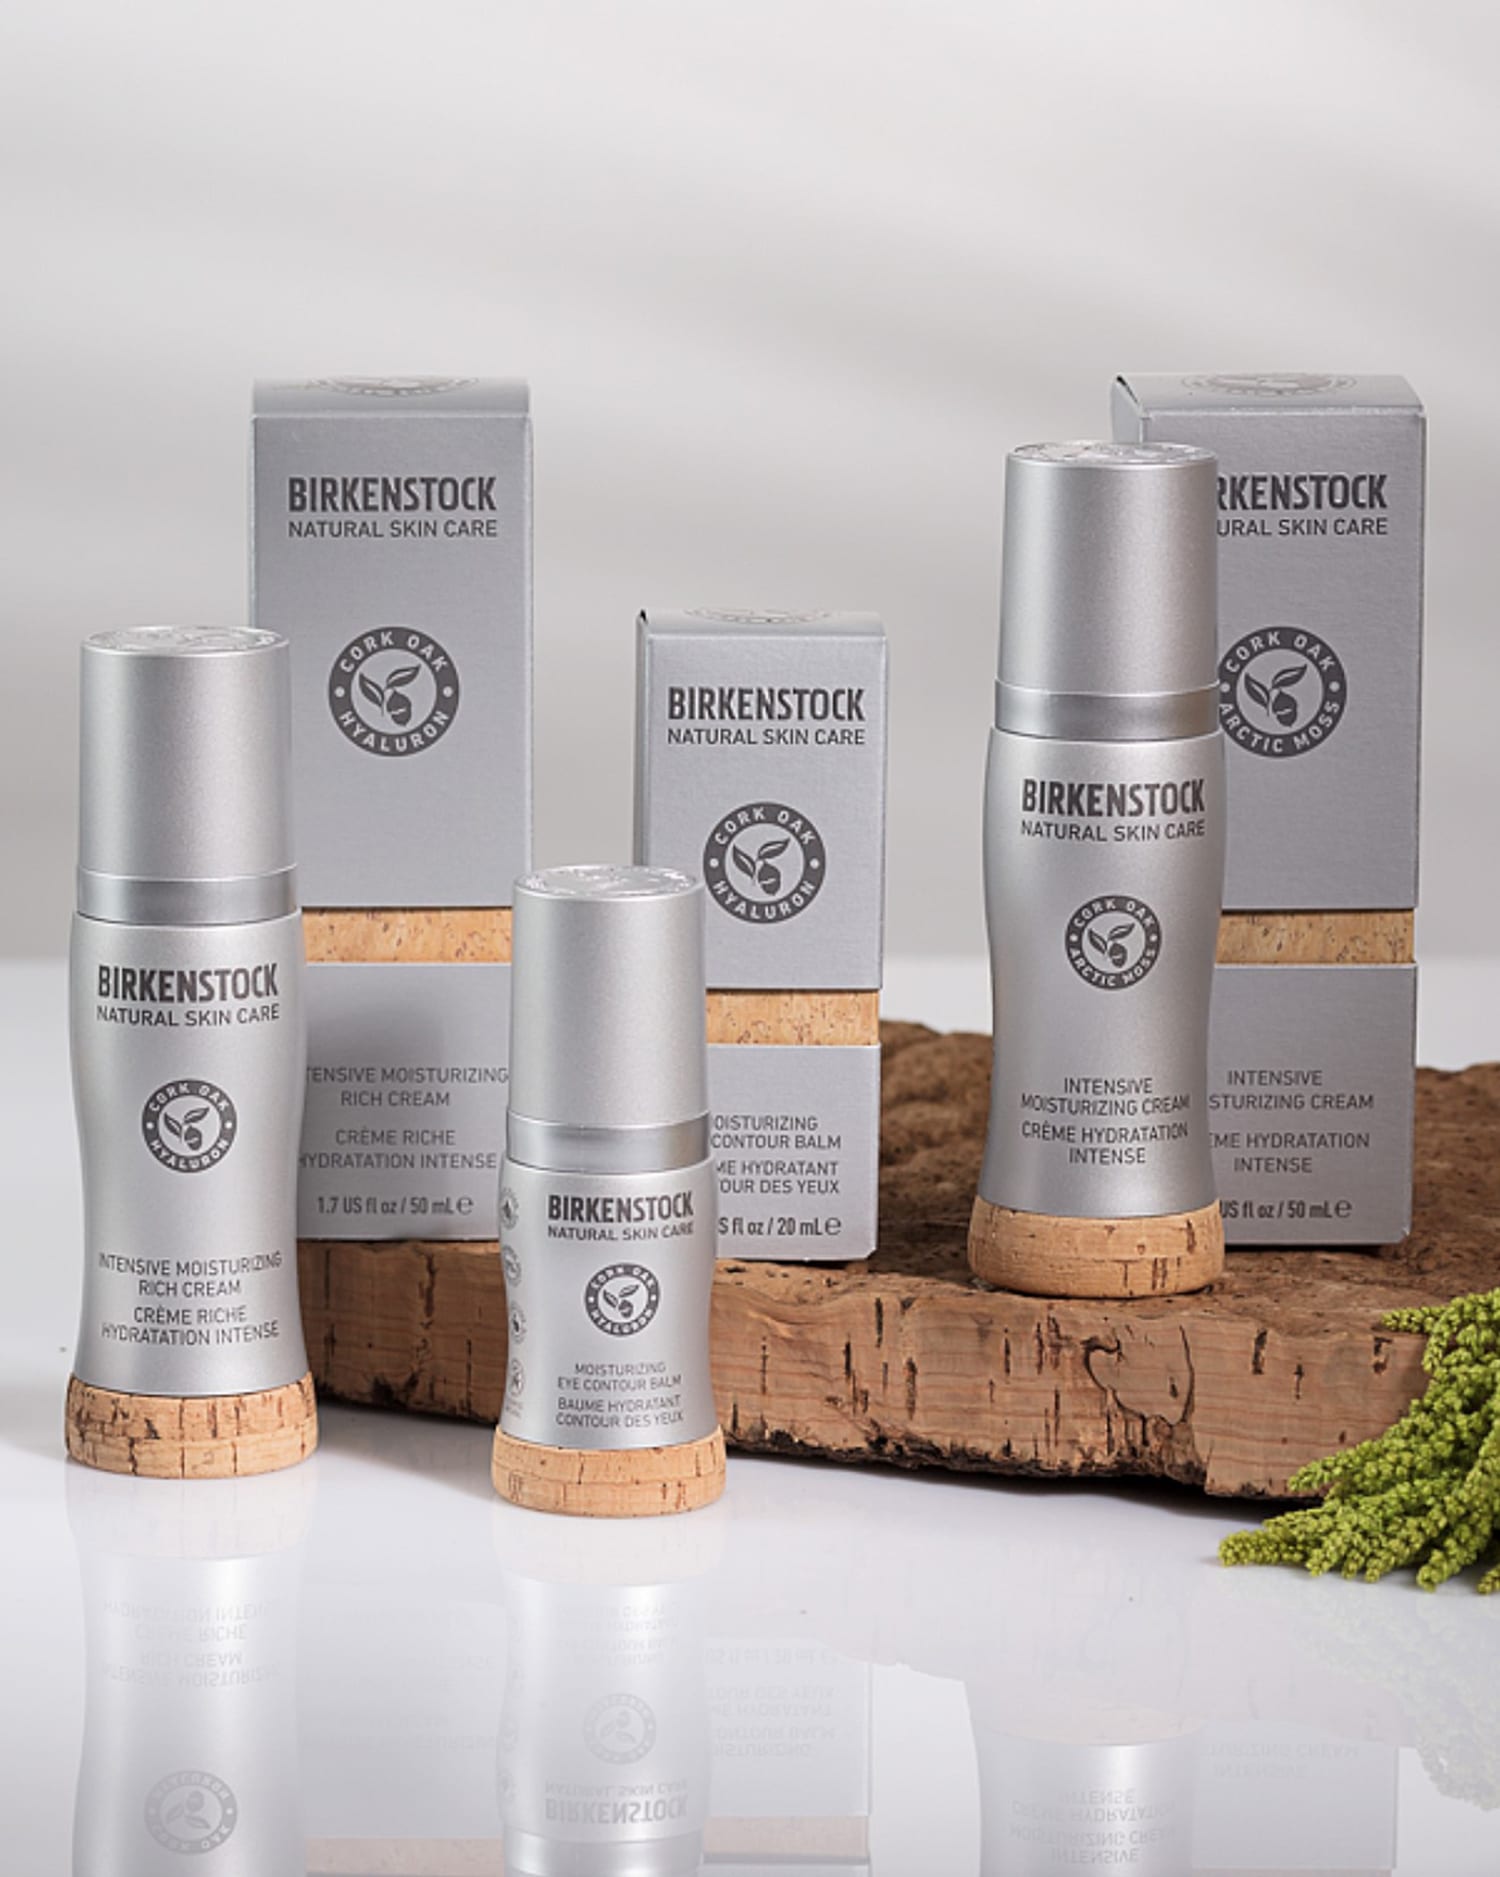 Birkenstock like the shoes — is launching a skin care line